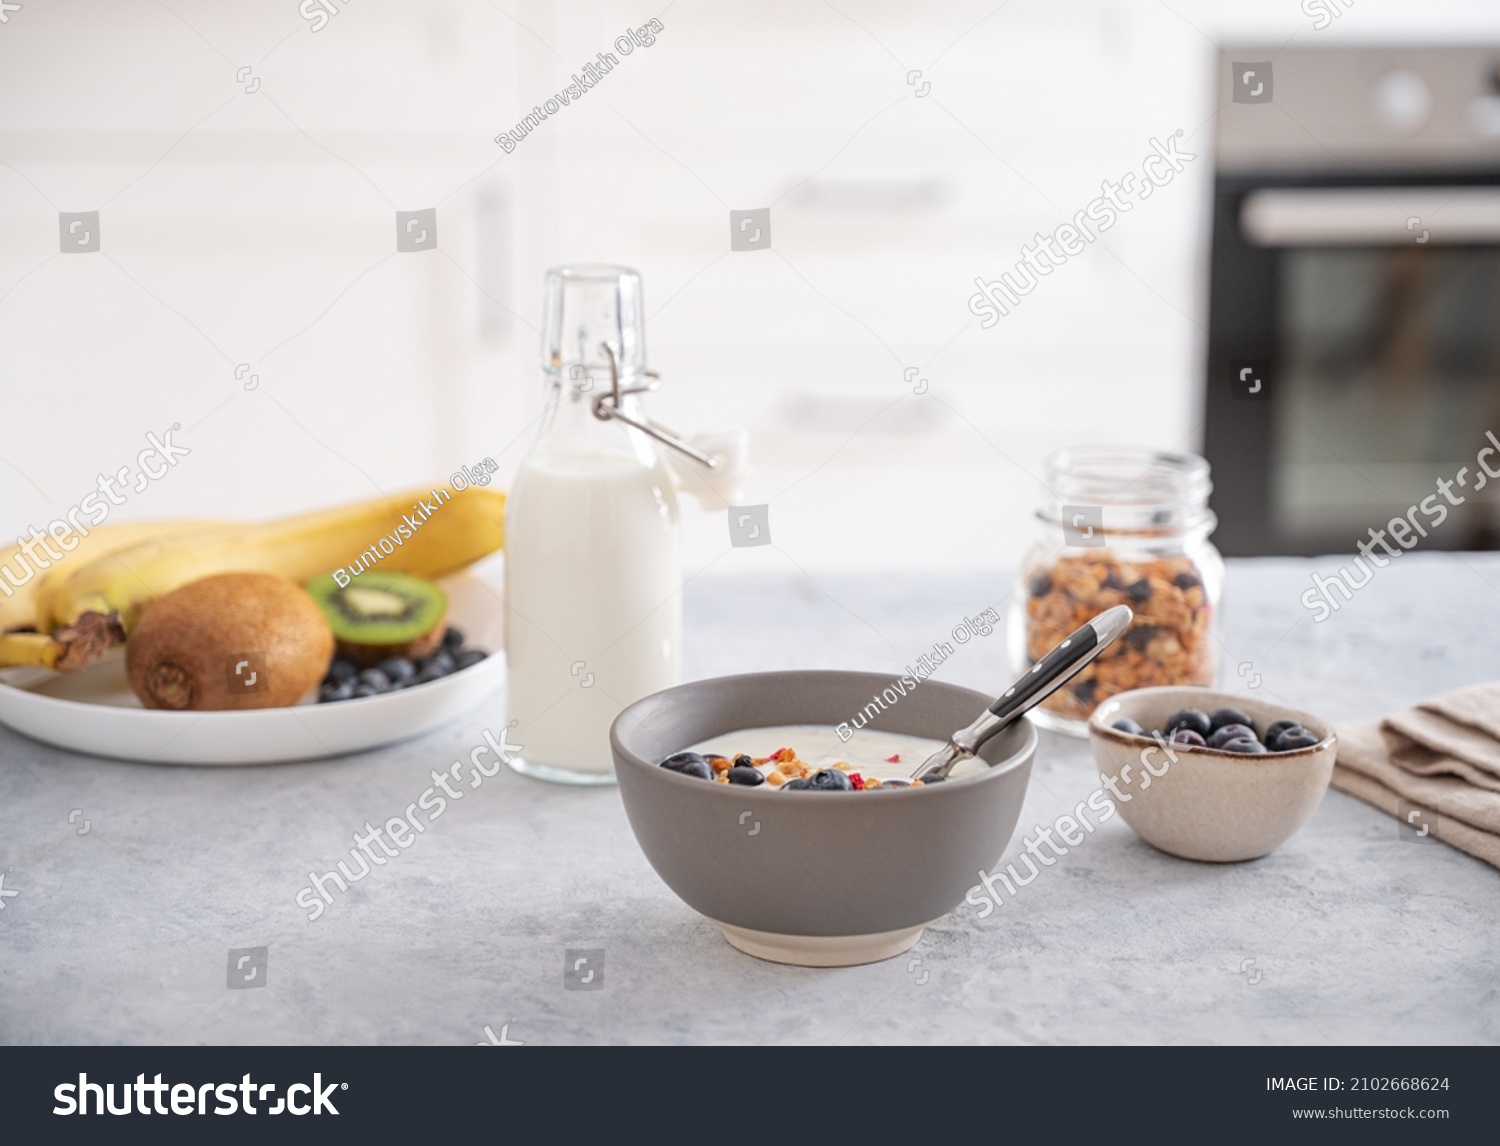 The concept of a healthy breakfast of vegetarian yogurt, granola and fresh fruit on a blue table against a white  kitchen background. Front view. #2102668624